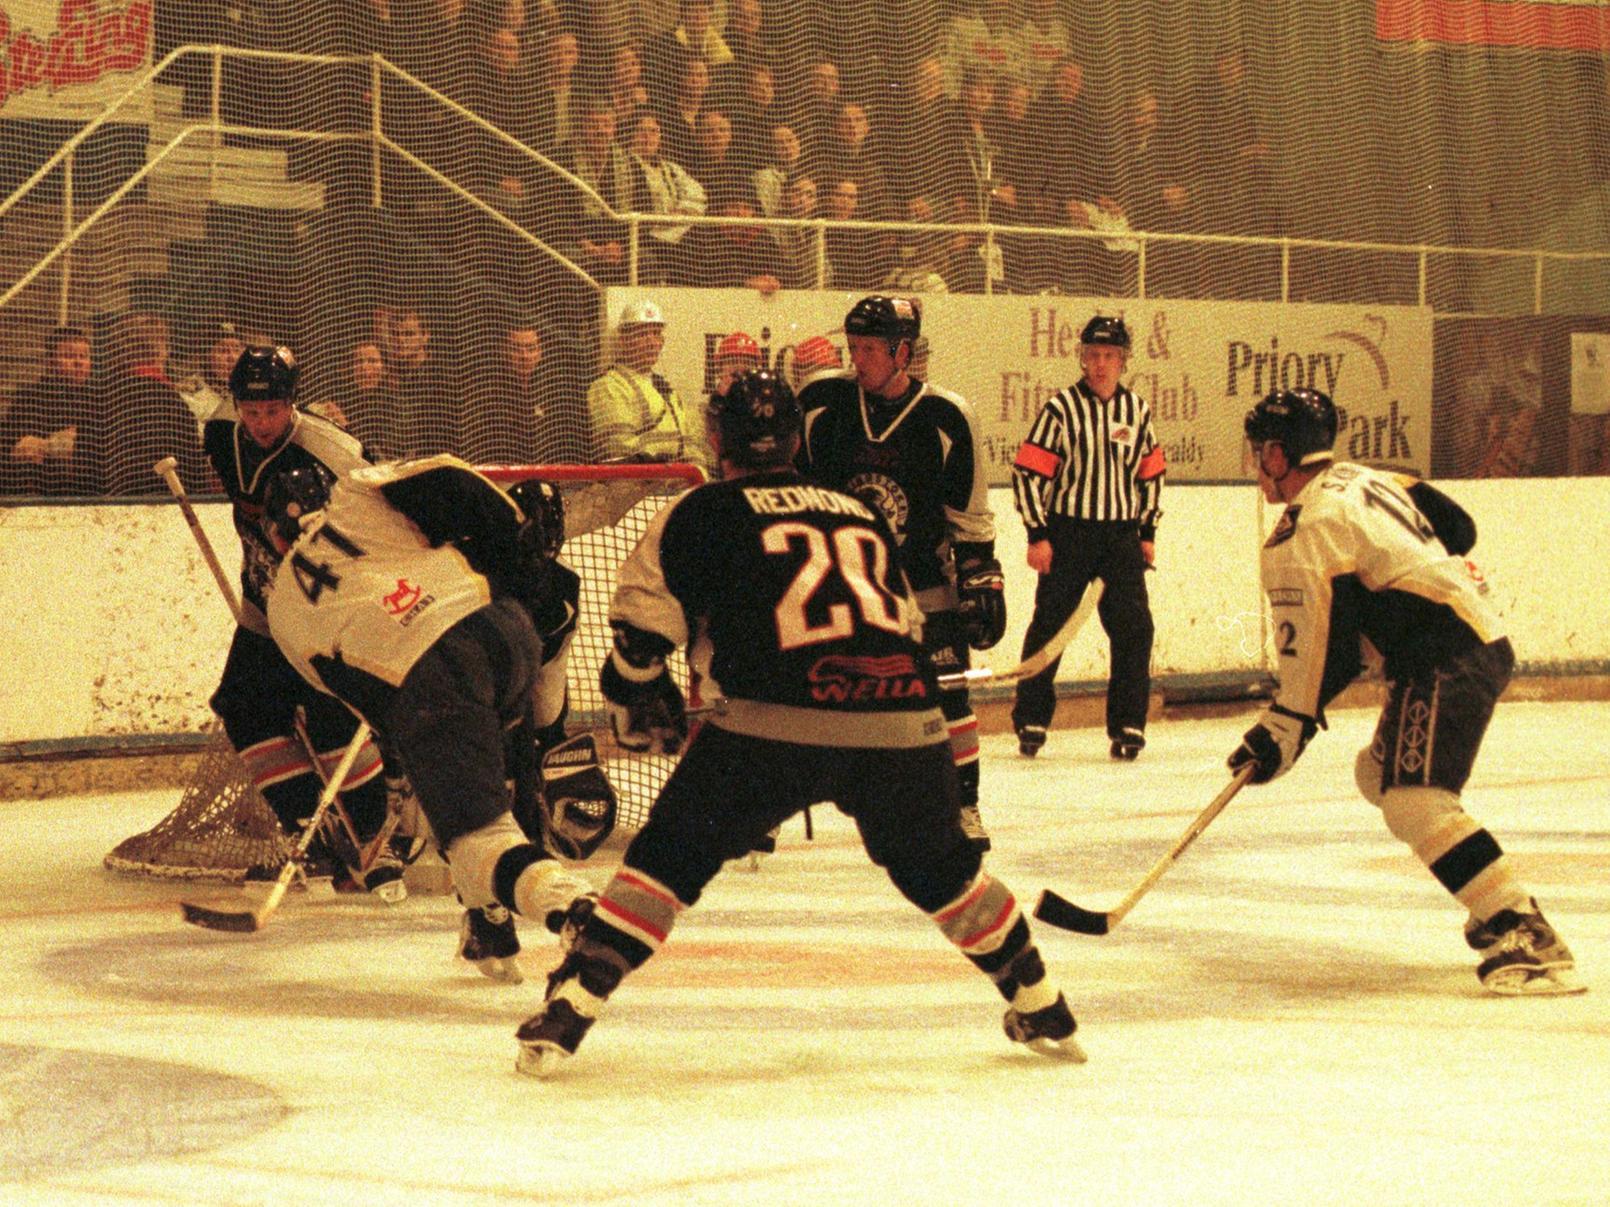 Russell Montieth goes for goal against Basingstoke Bison